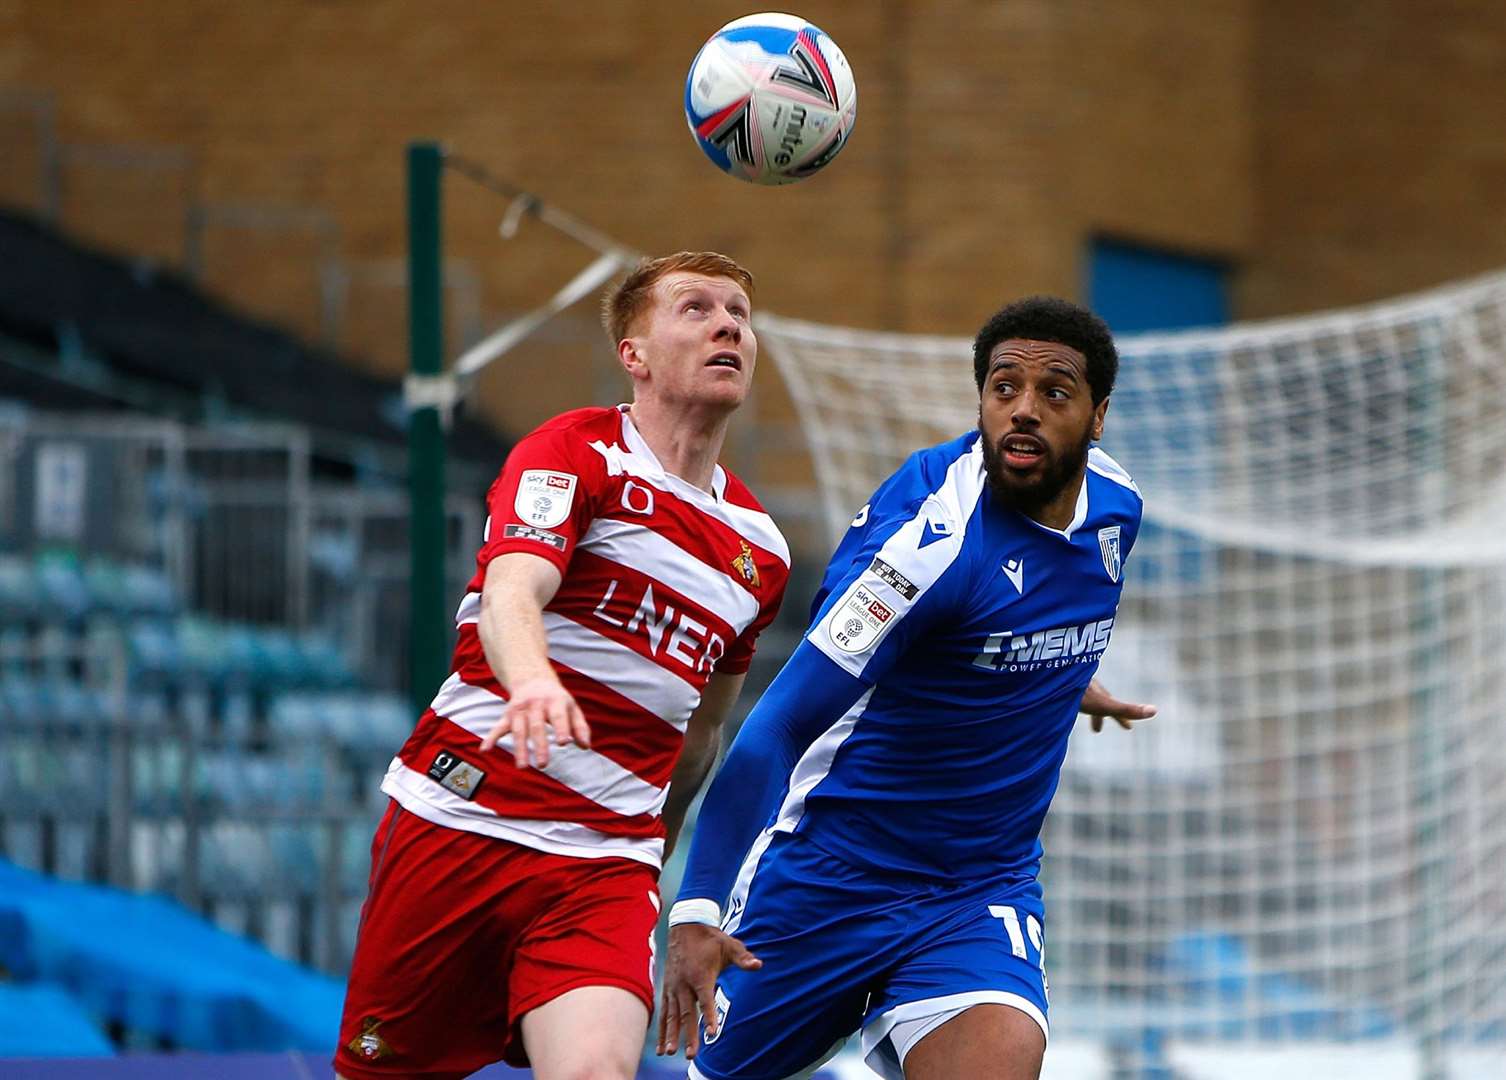 Vadaine Oliver keeps his eye on the ball against Doncaster on Saturday. Picture: Andy Jones (45336109)